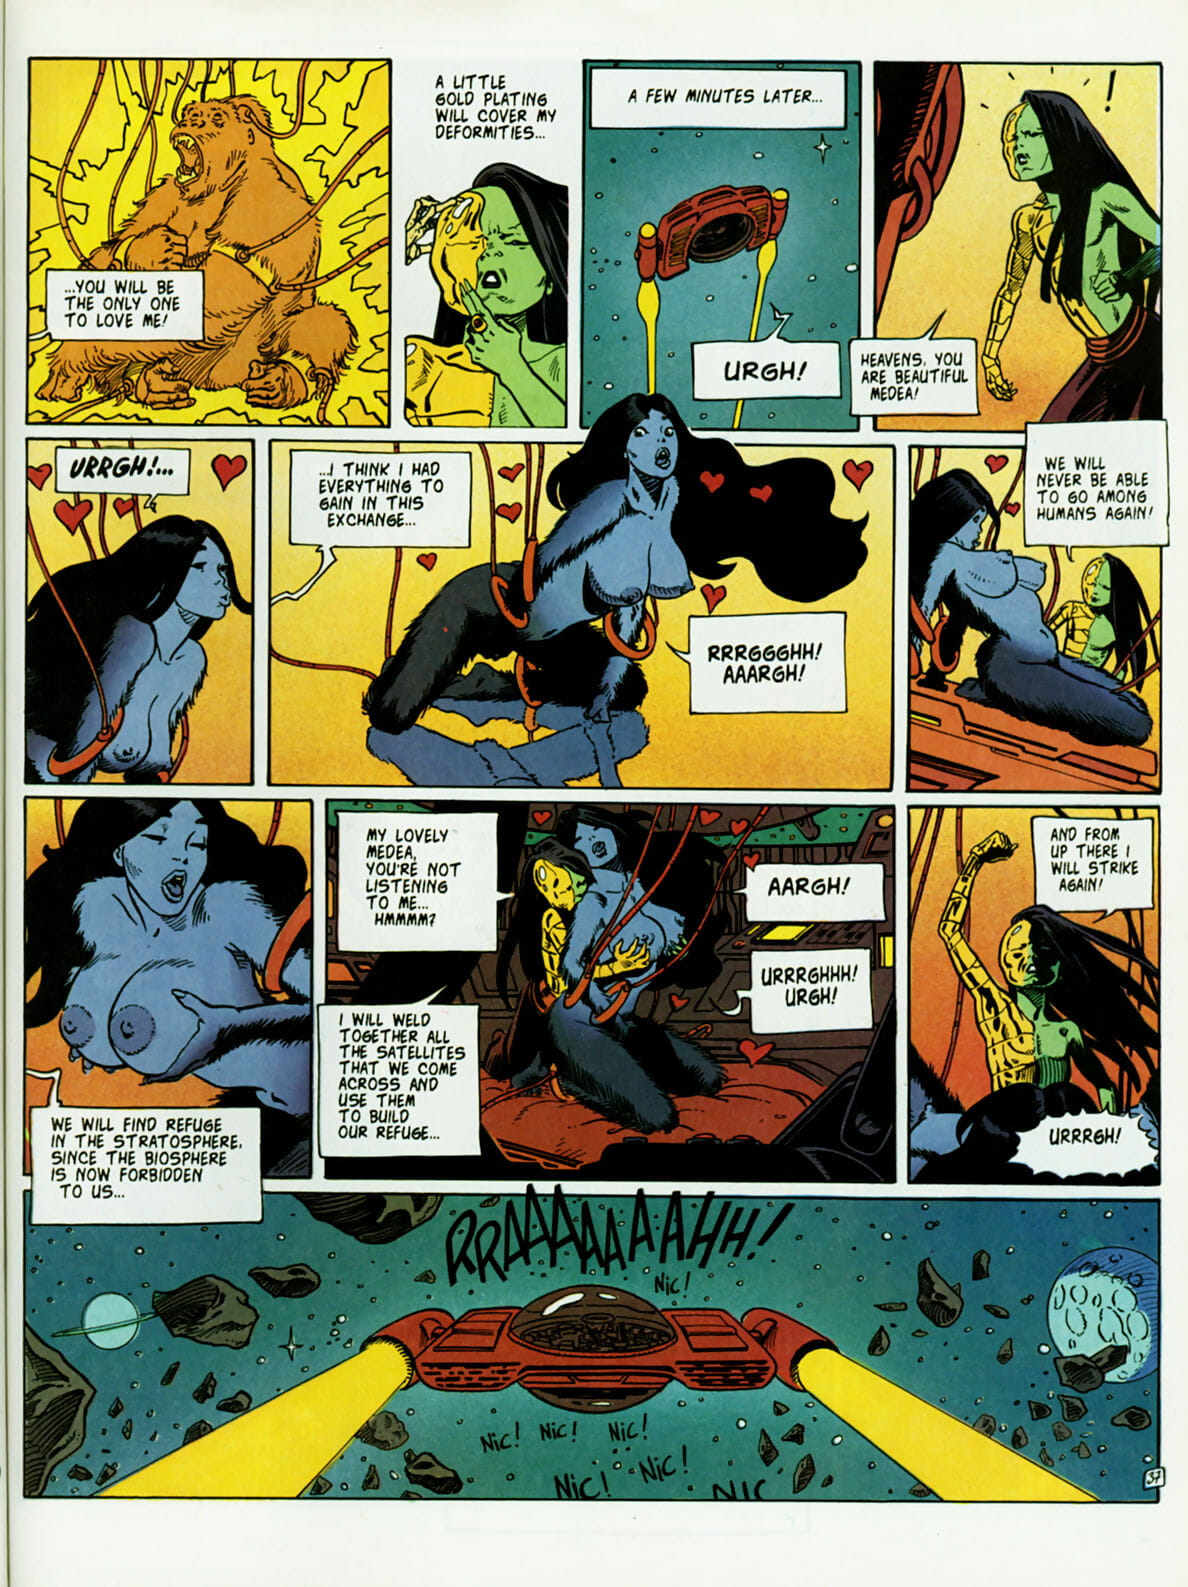 Heavy Metal Special - Pin-Ups - Vol.8-1 - part 2 page 1